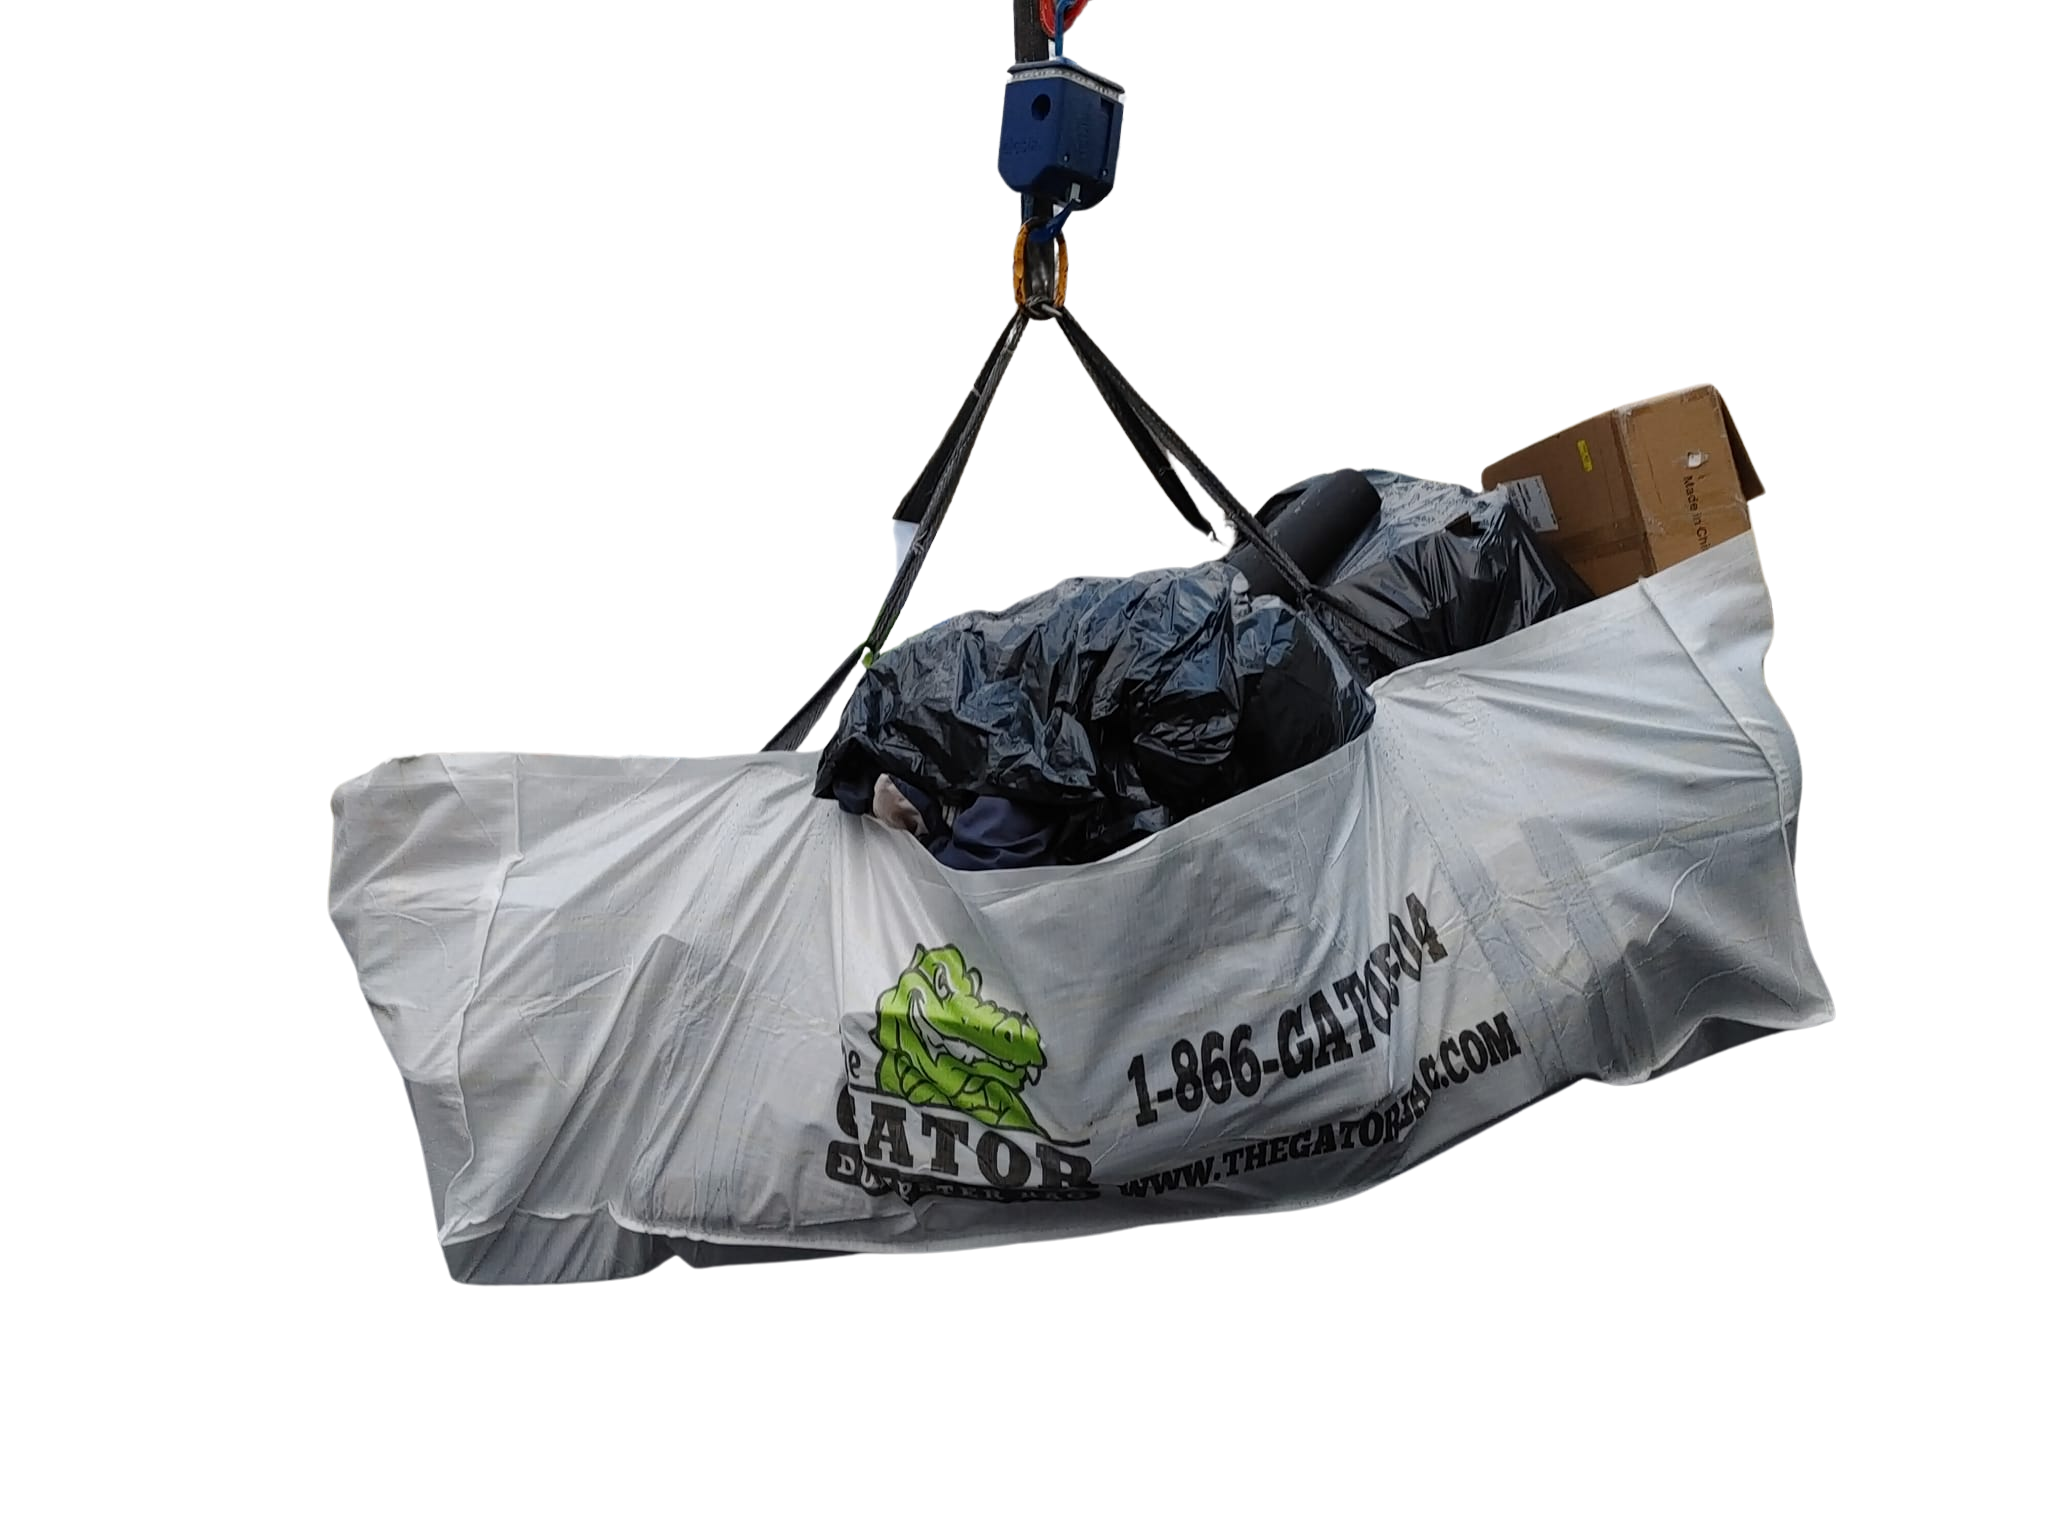 Bagster, dumpster in a bag. | Bags, Dumpster, Recycled concrete